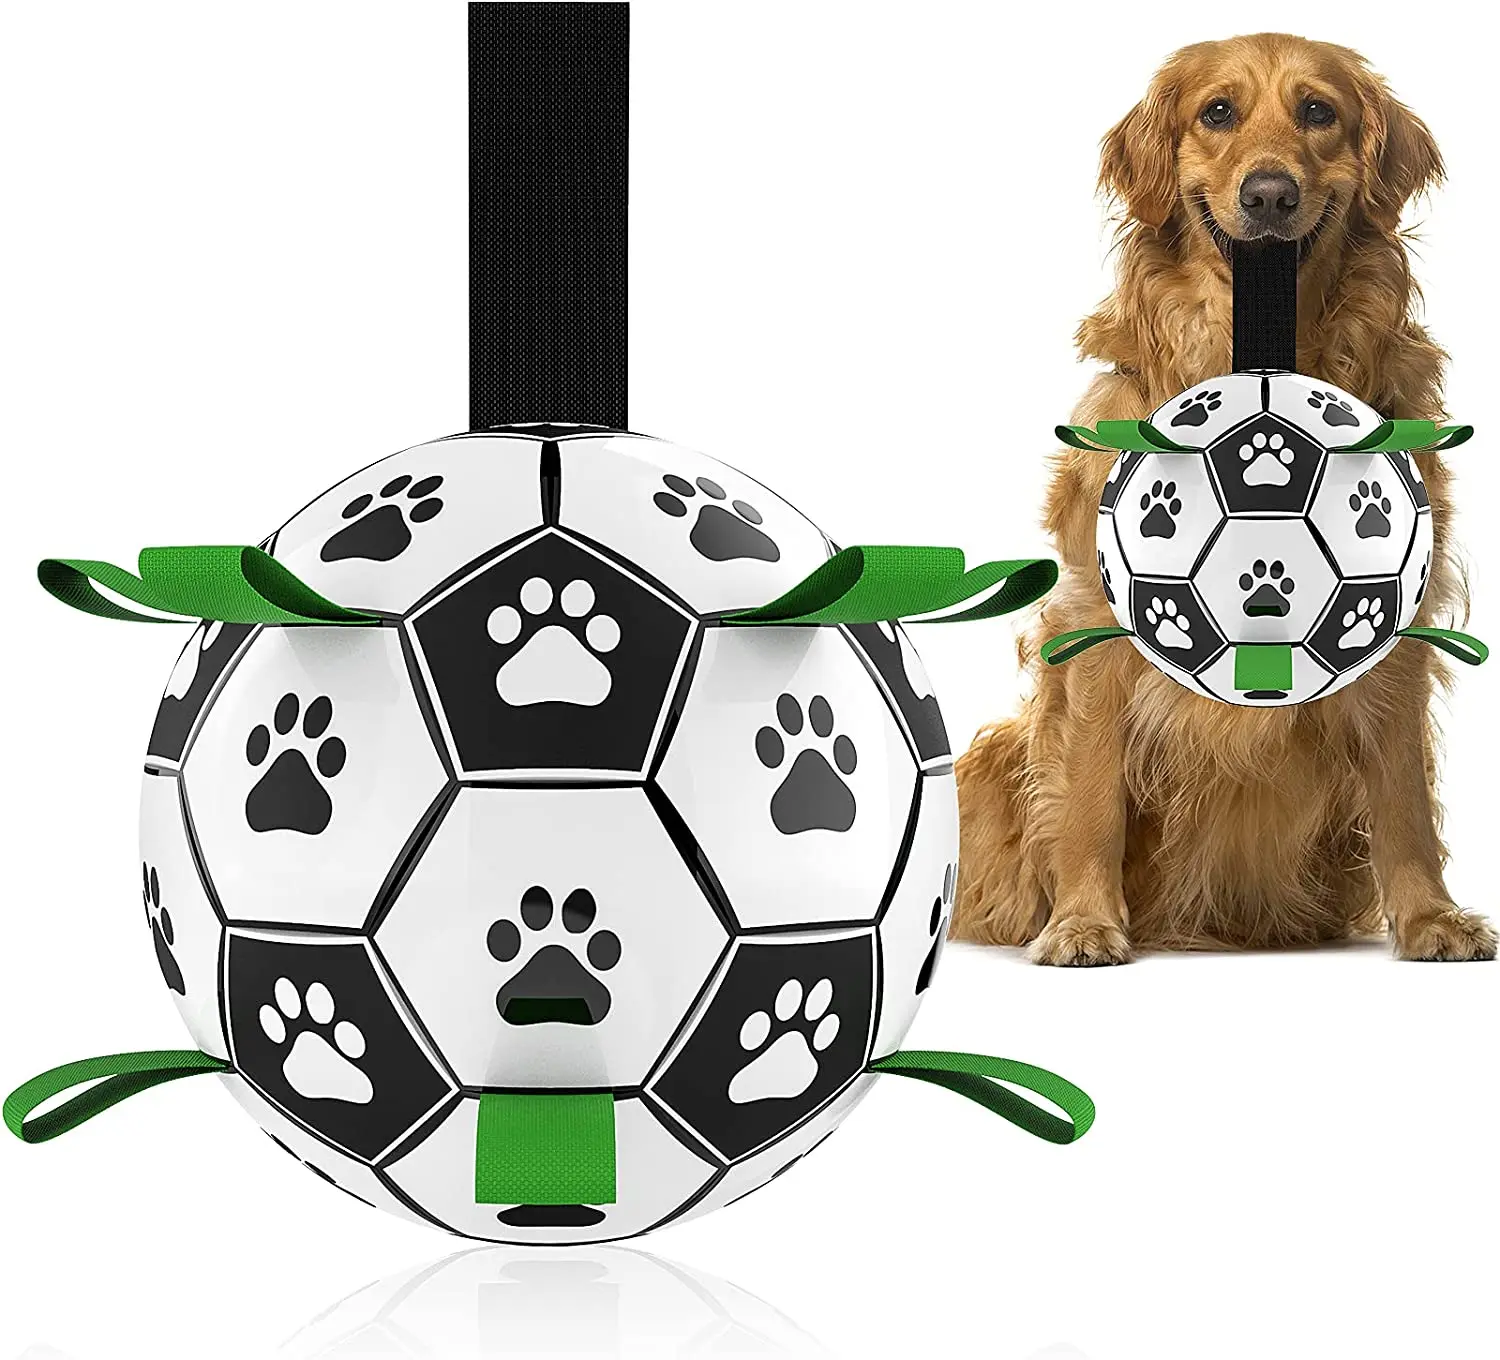 

Dog Toys Soccer Ball with Straps Interactive Toy for Tug of War Puppy Birthday Gifts Water Toy Dog Balls for Medium Large Dogs